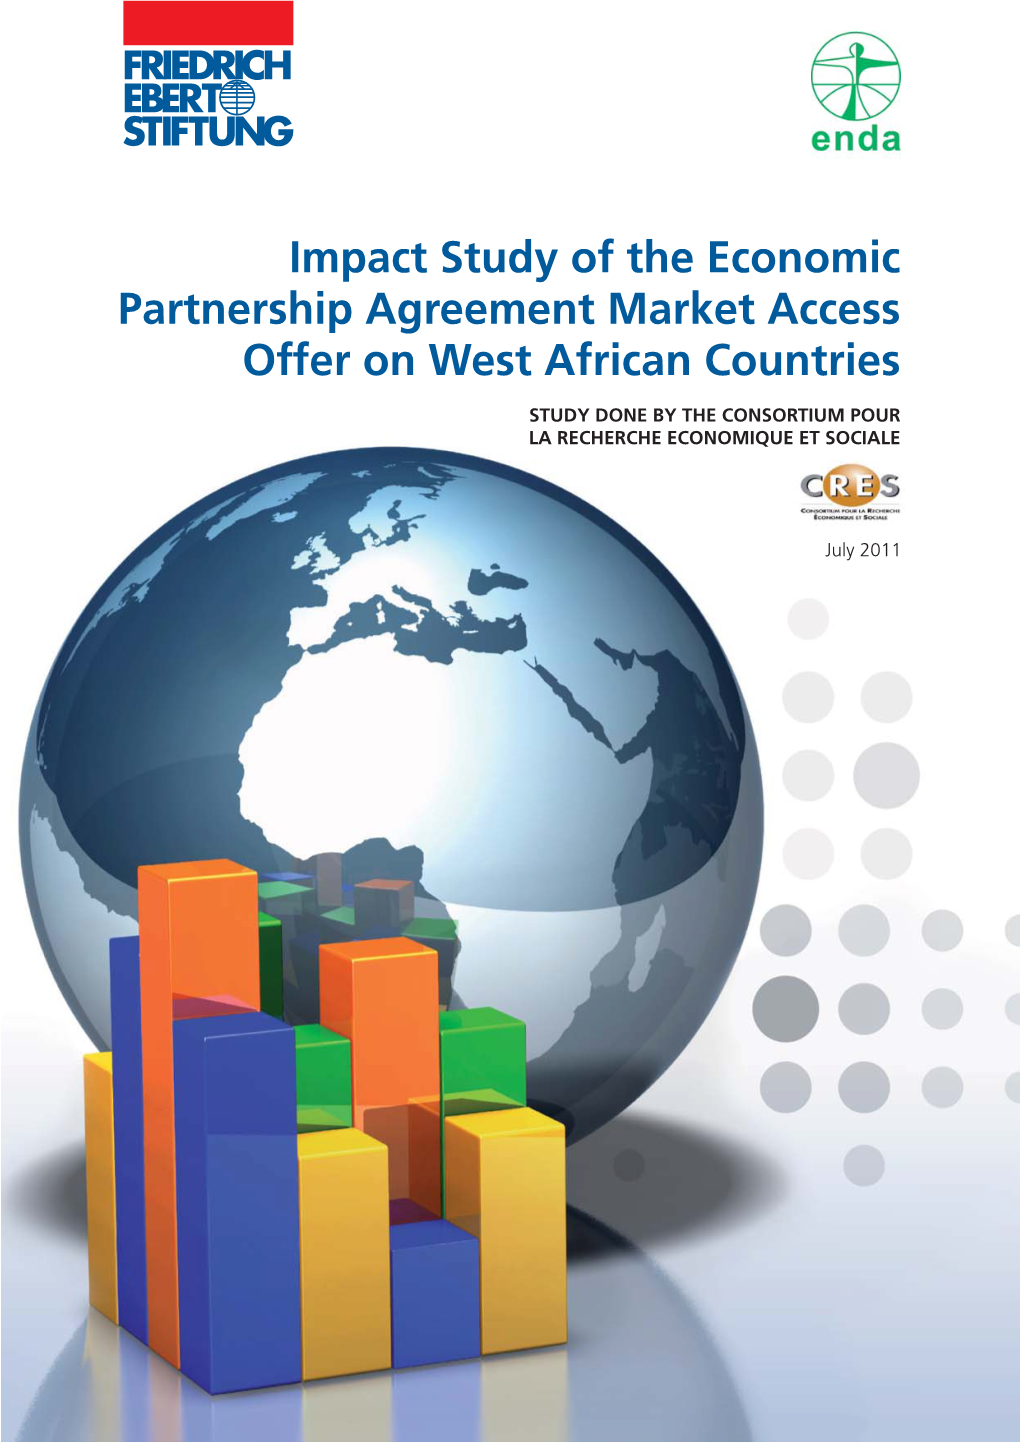 Impact Study of the Economic Partnership Agreement Market Access Offer on West African Countries